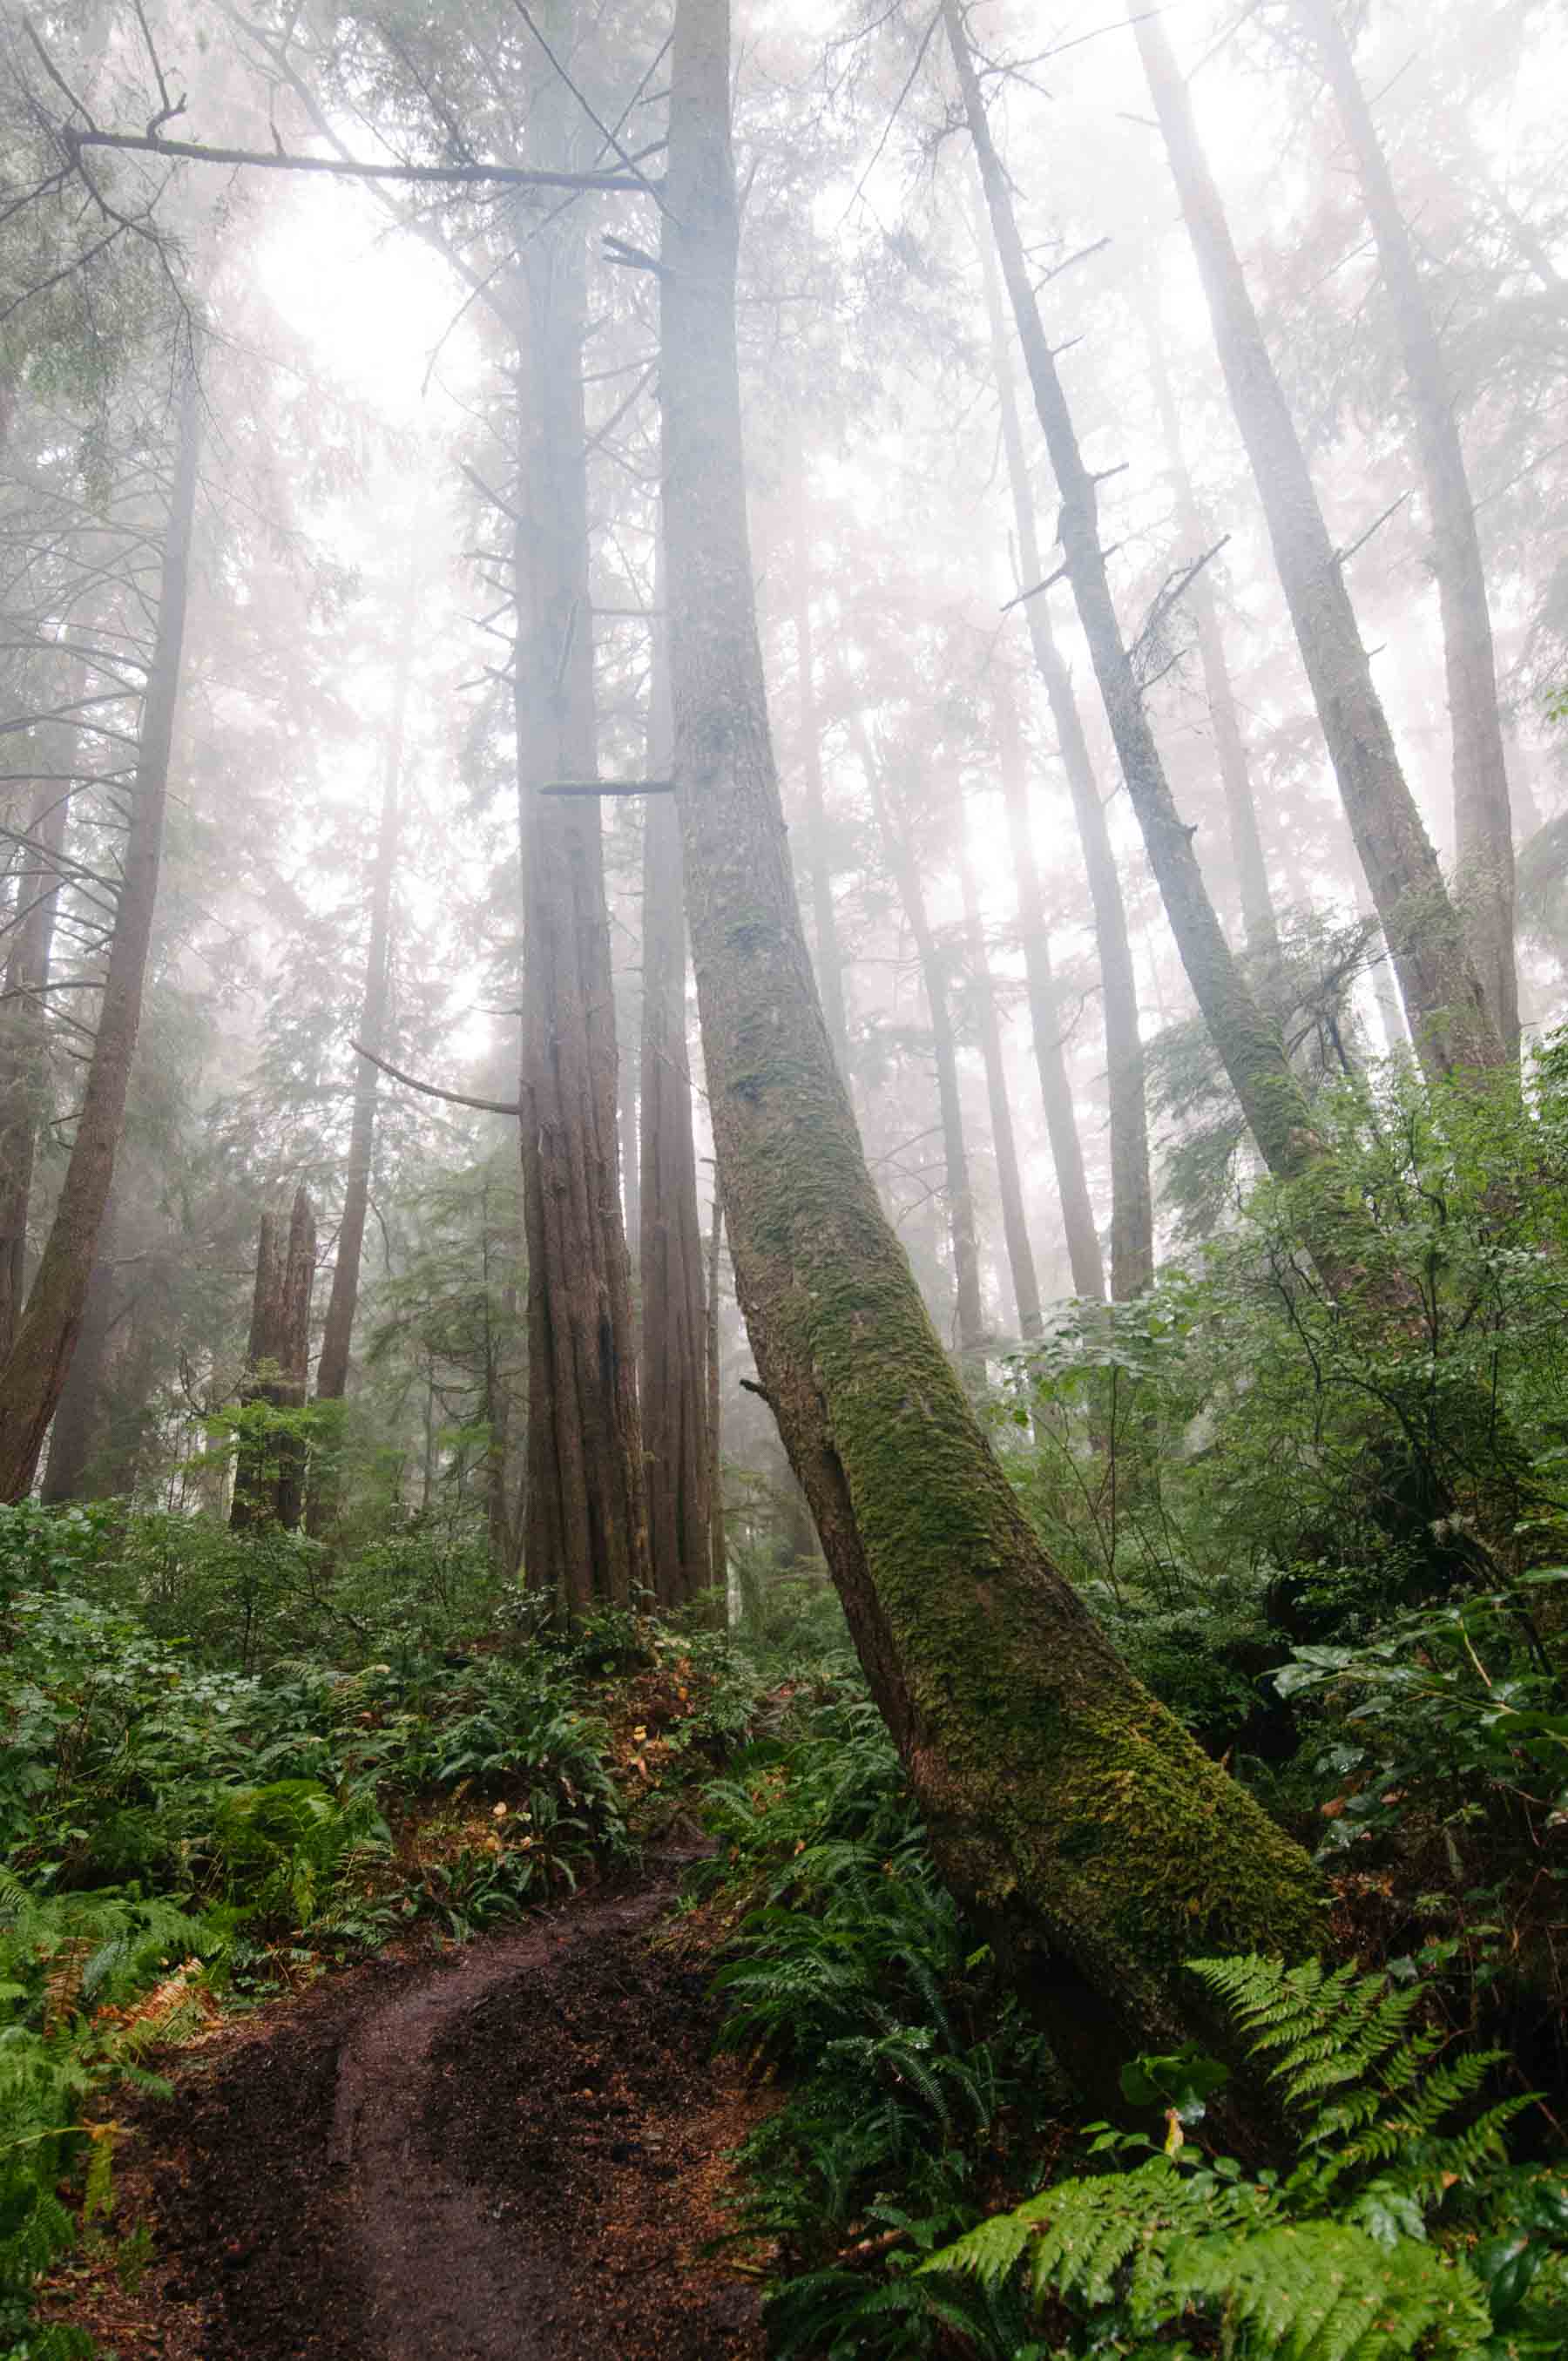 Hiking through the foggy forests of the West Coast Trail